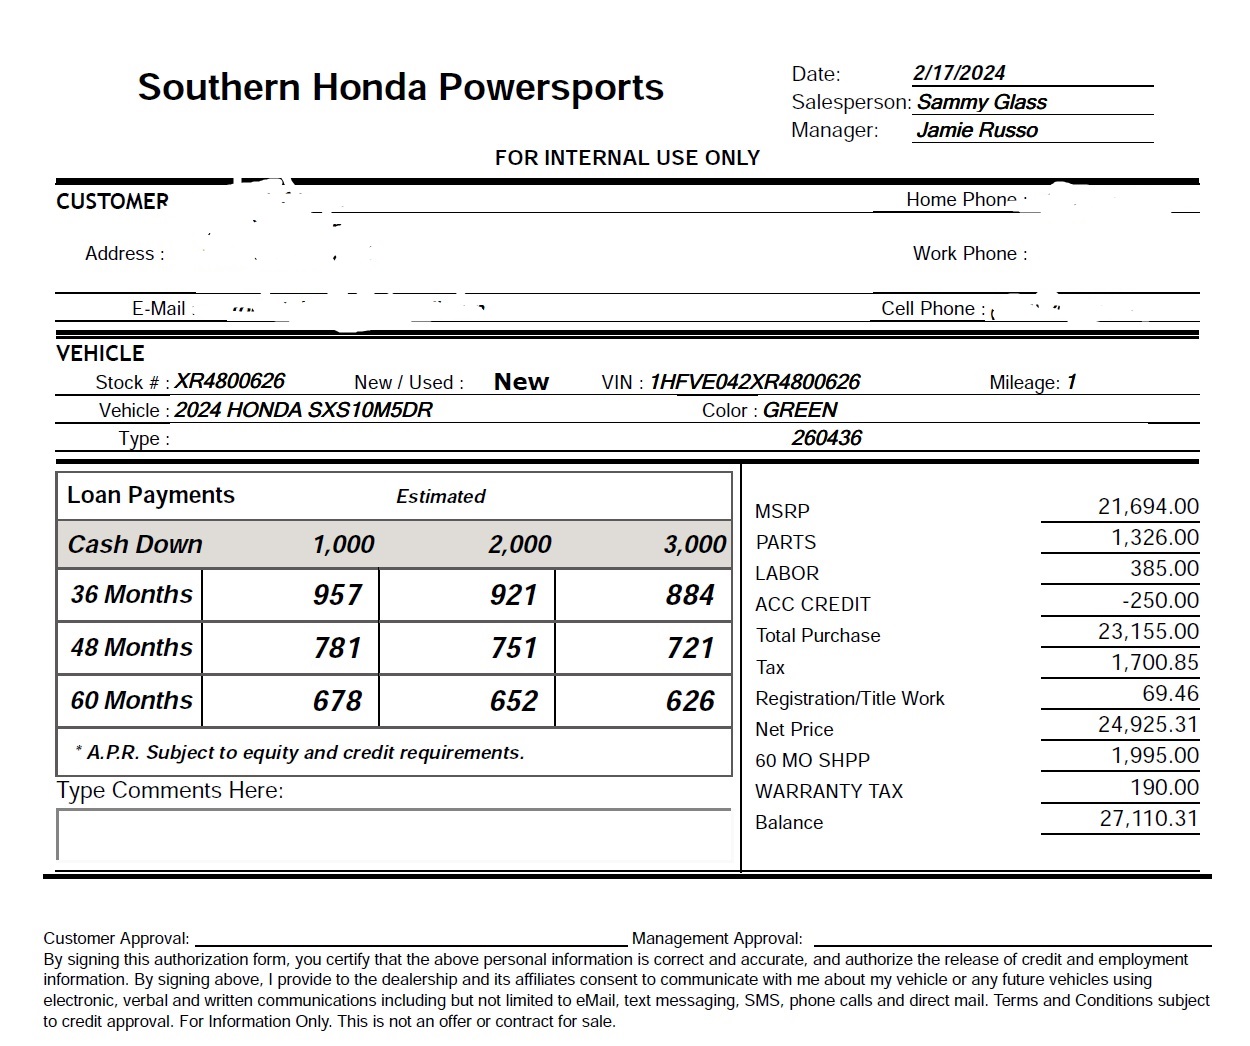 Southern Honda Powesports Quote Feb 24